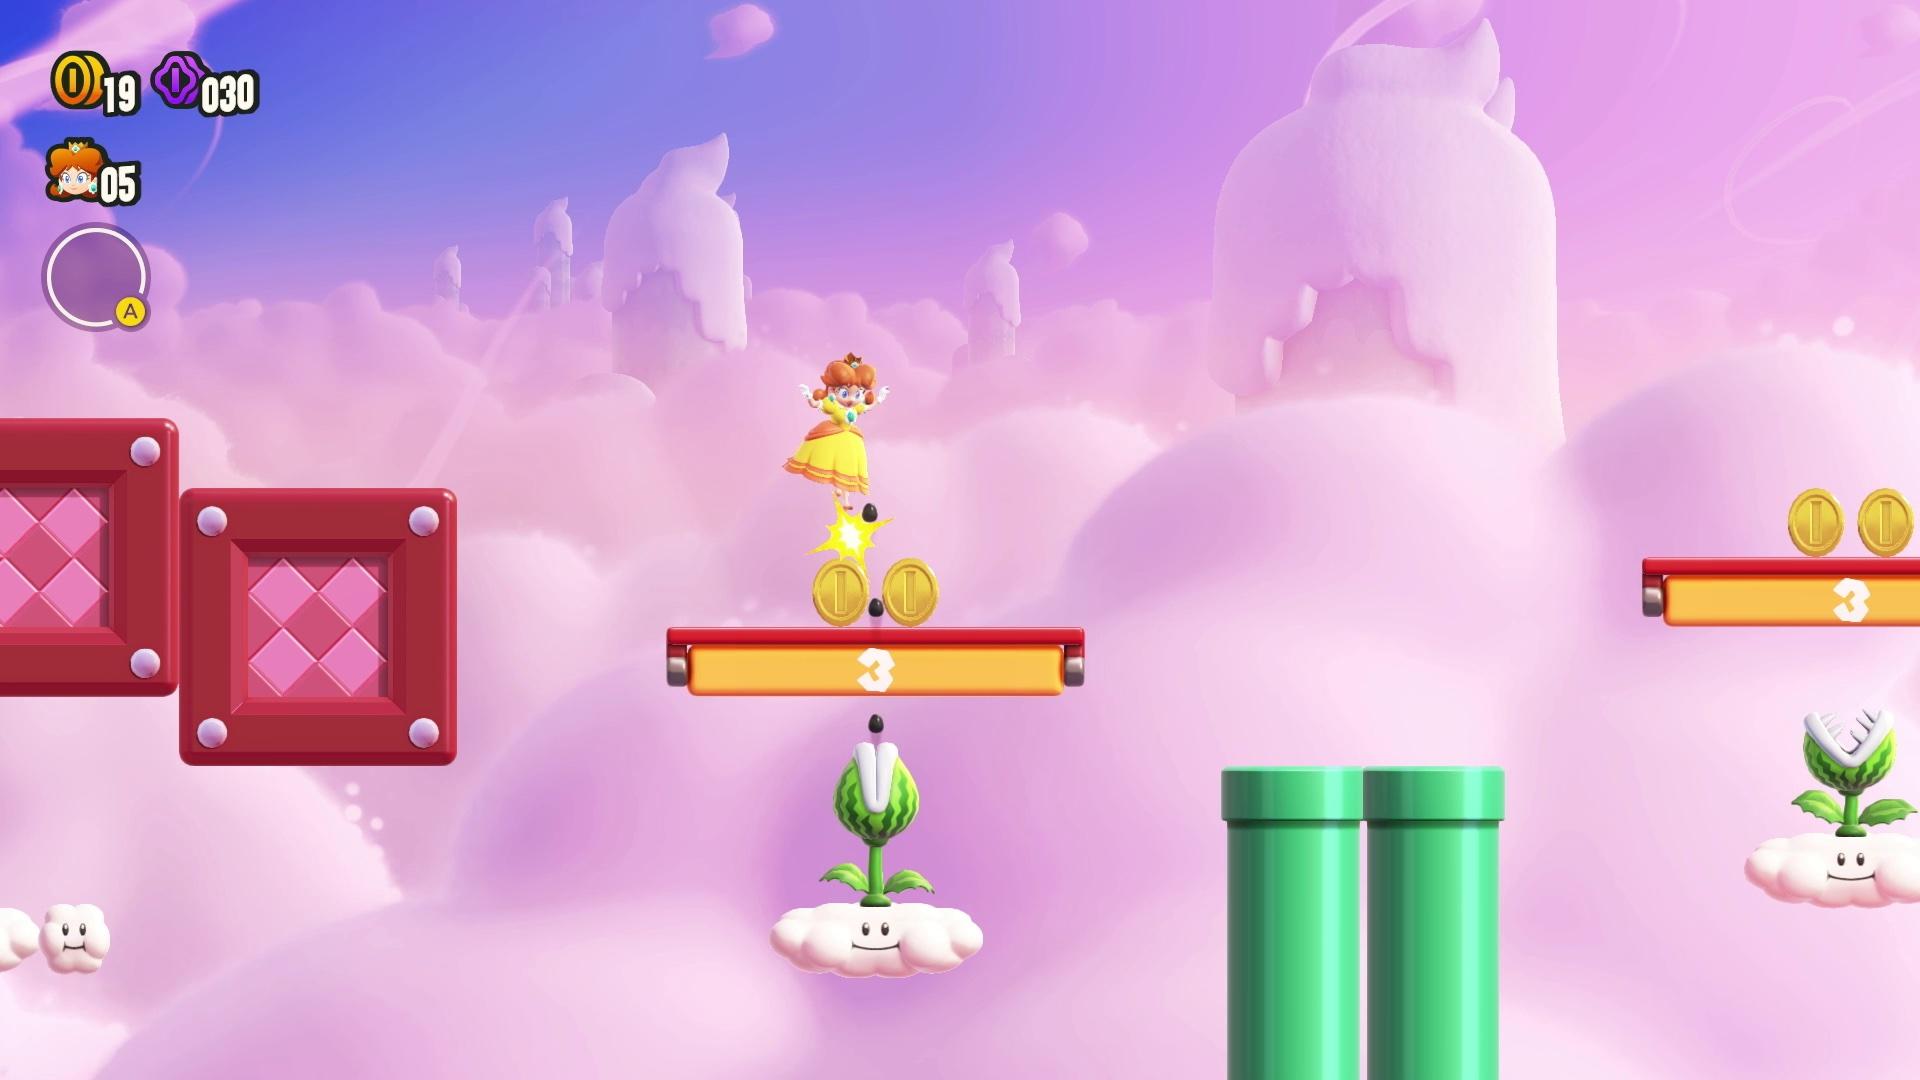 Daisy navigating a level in the sky in 'Super Mario Bros. Wonder'